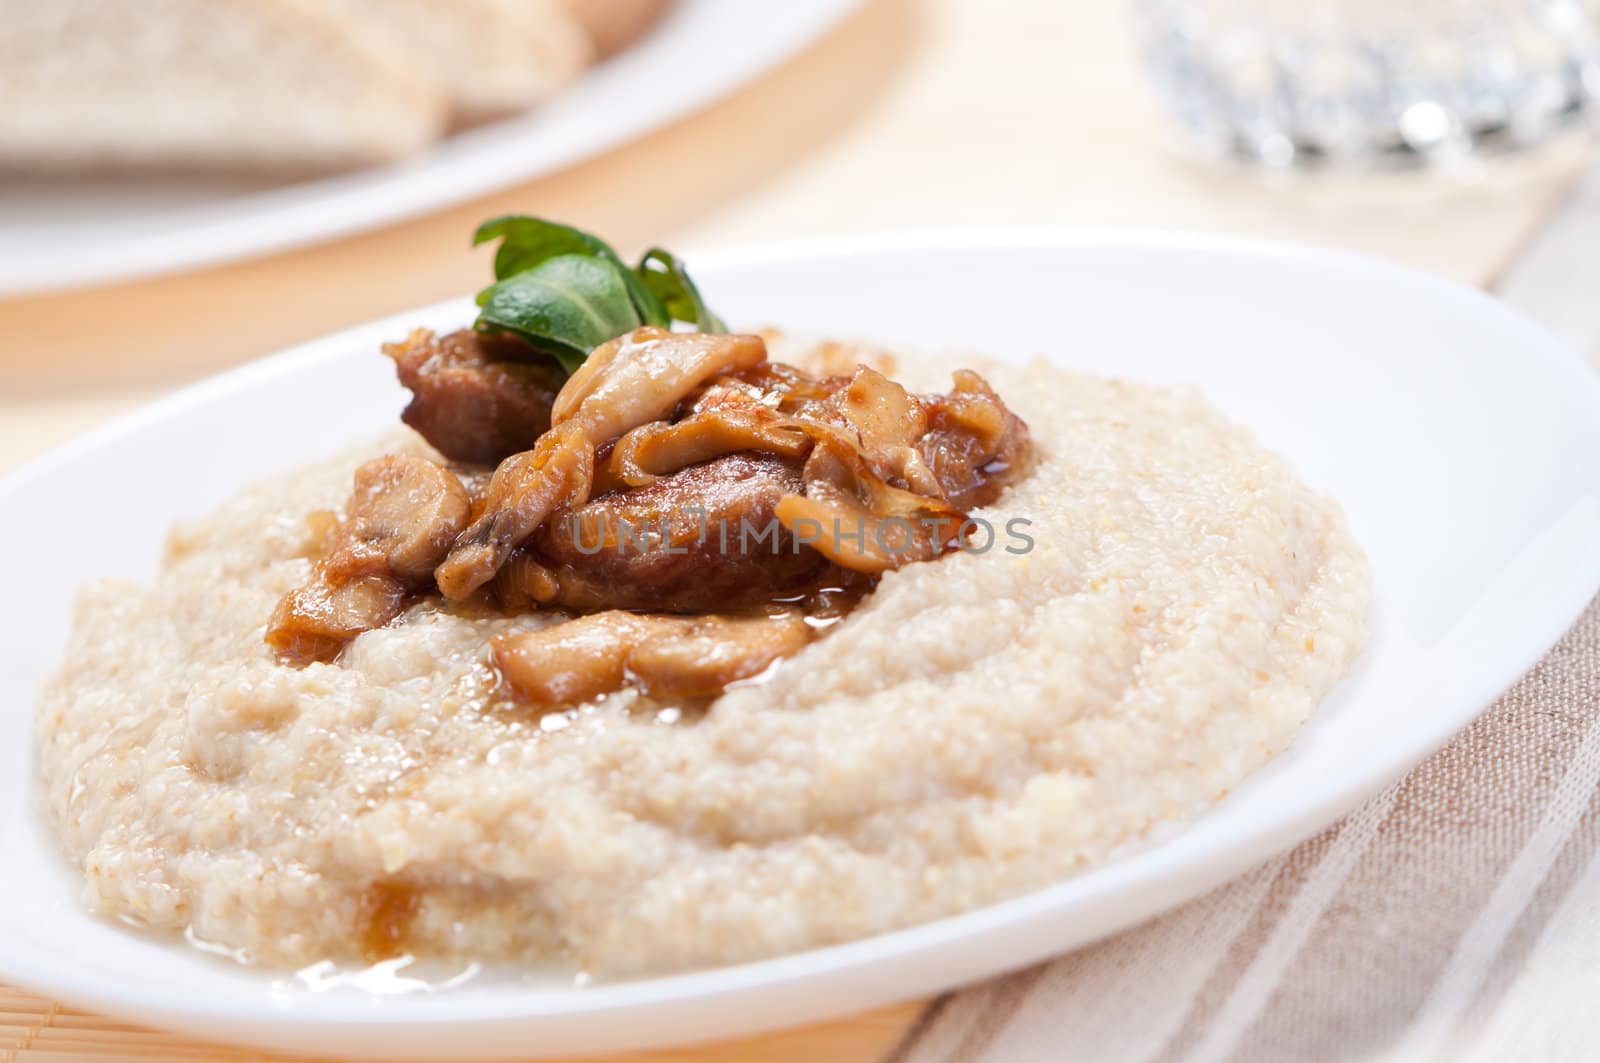 Porridge with fried mushrooms and meat.